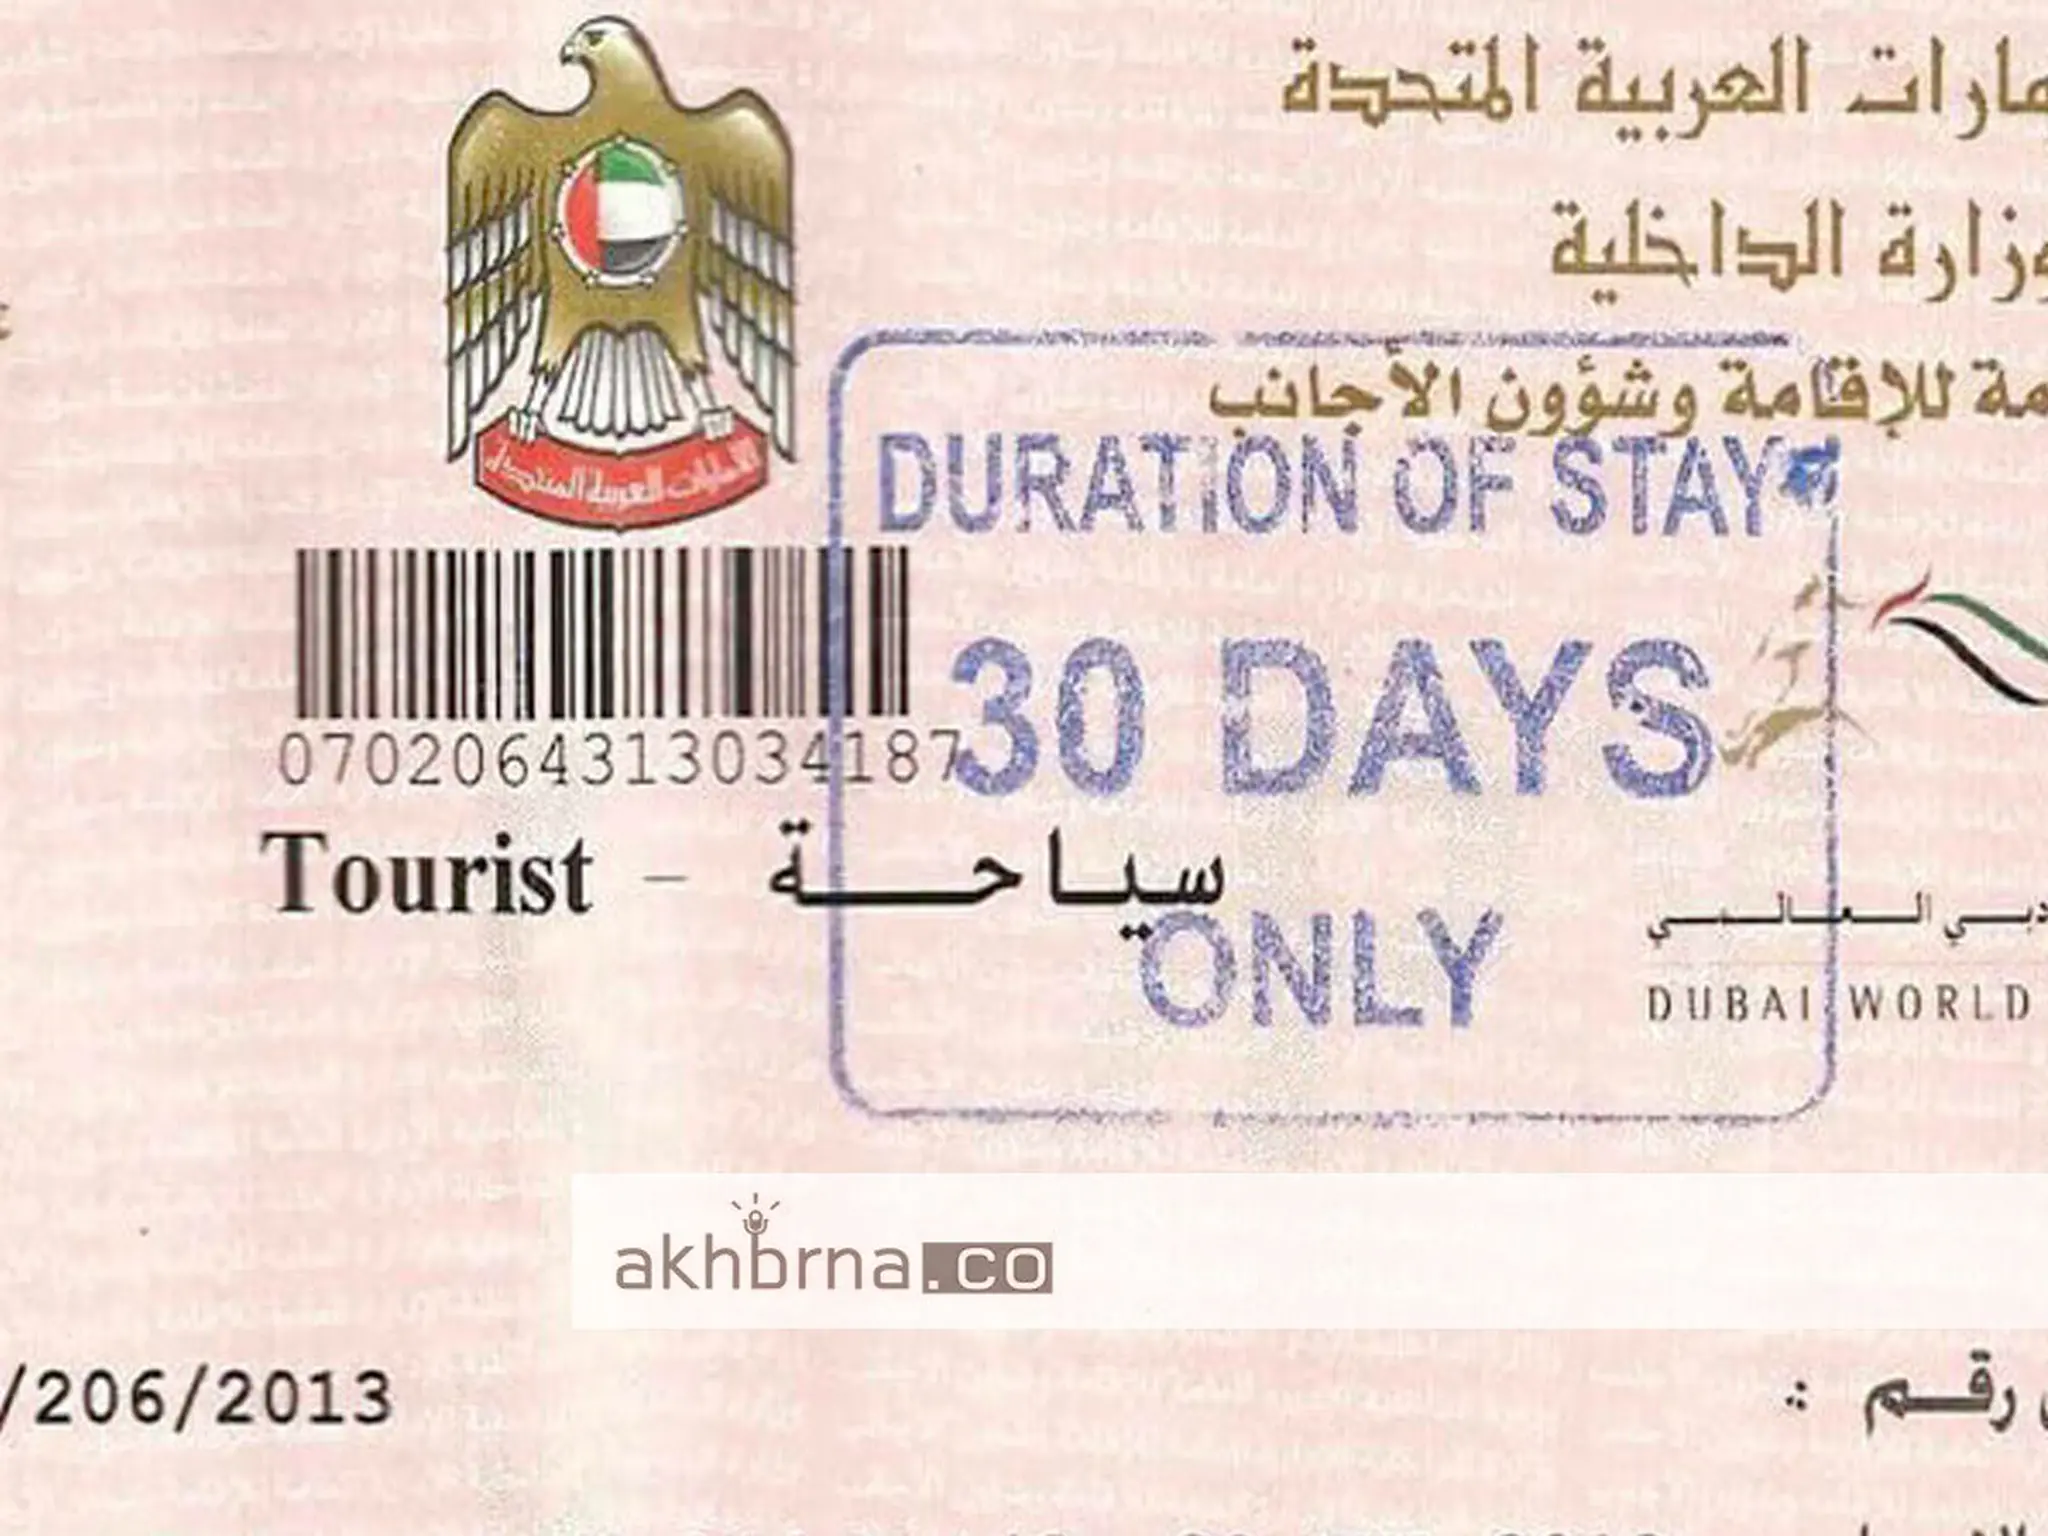 UAE: Will Dh50,000 fine apply if I run friend's business on visit visa?